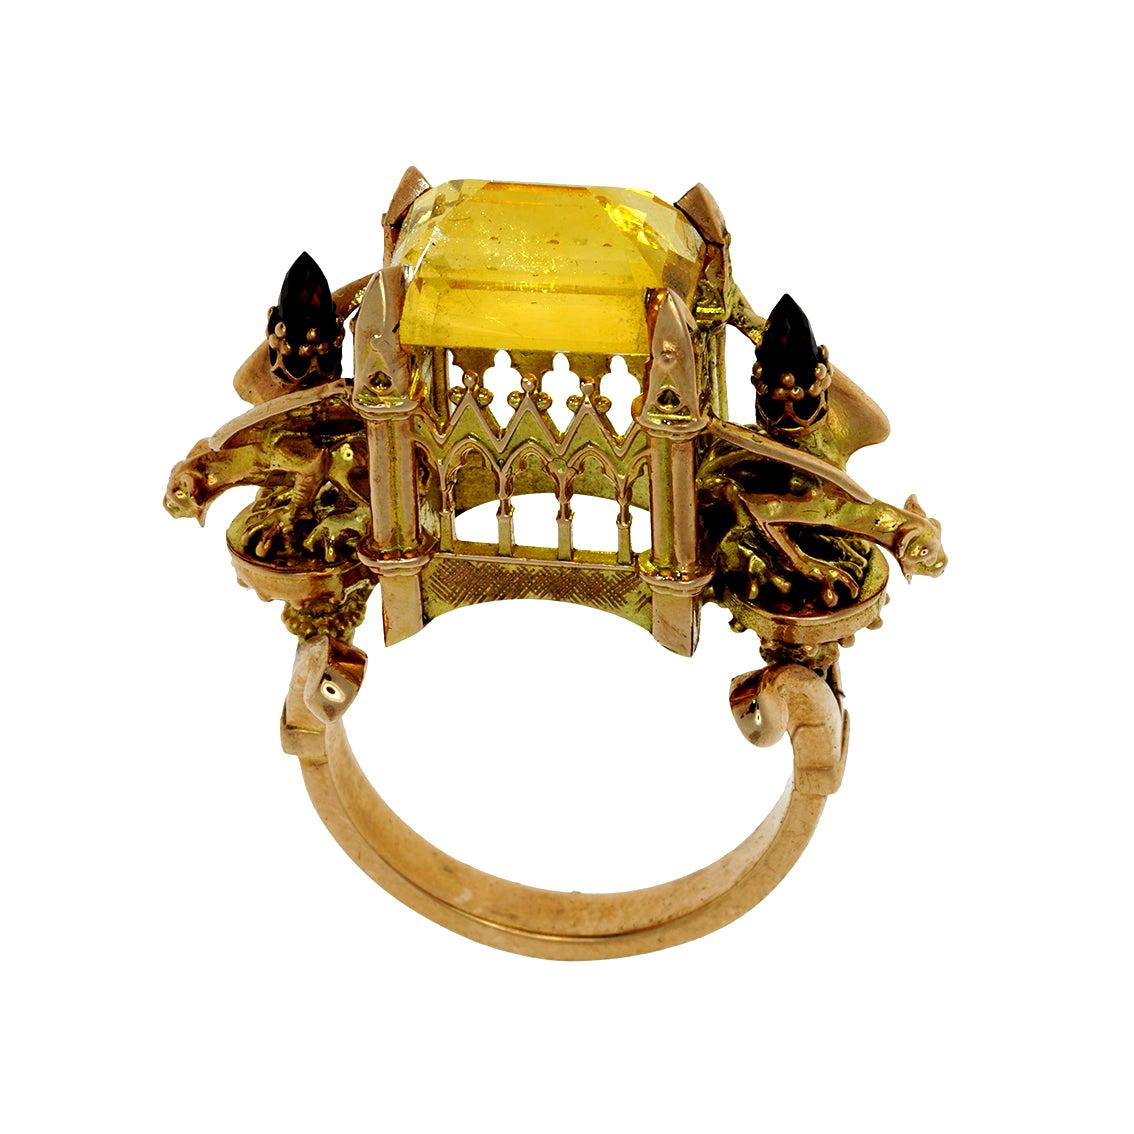 William Llewellyn Griffiths 9 Karat Gold Citrin Euphoric Triumph Kathedrale Ring